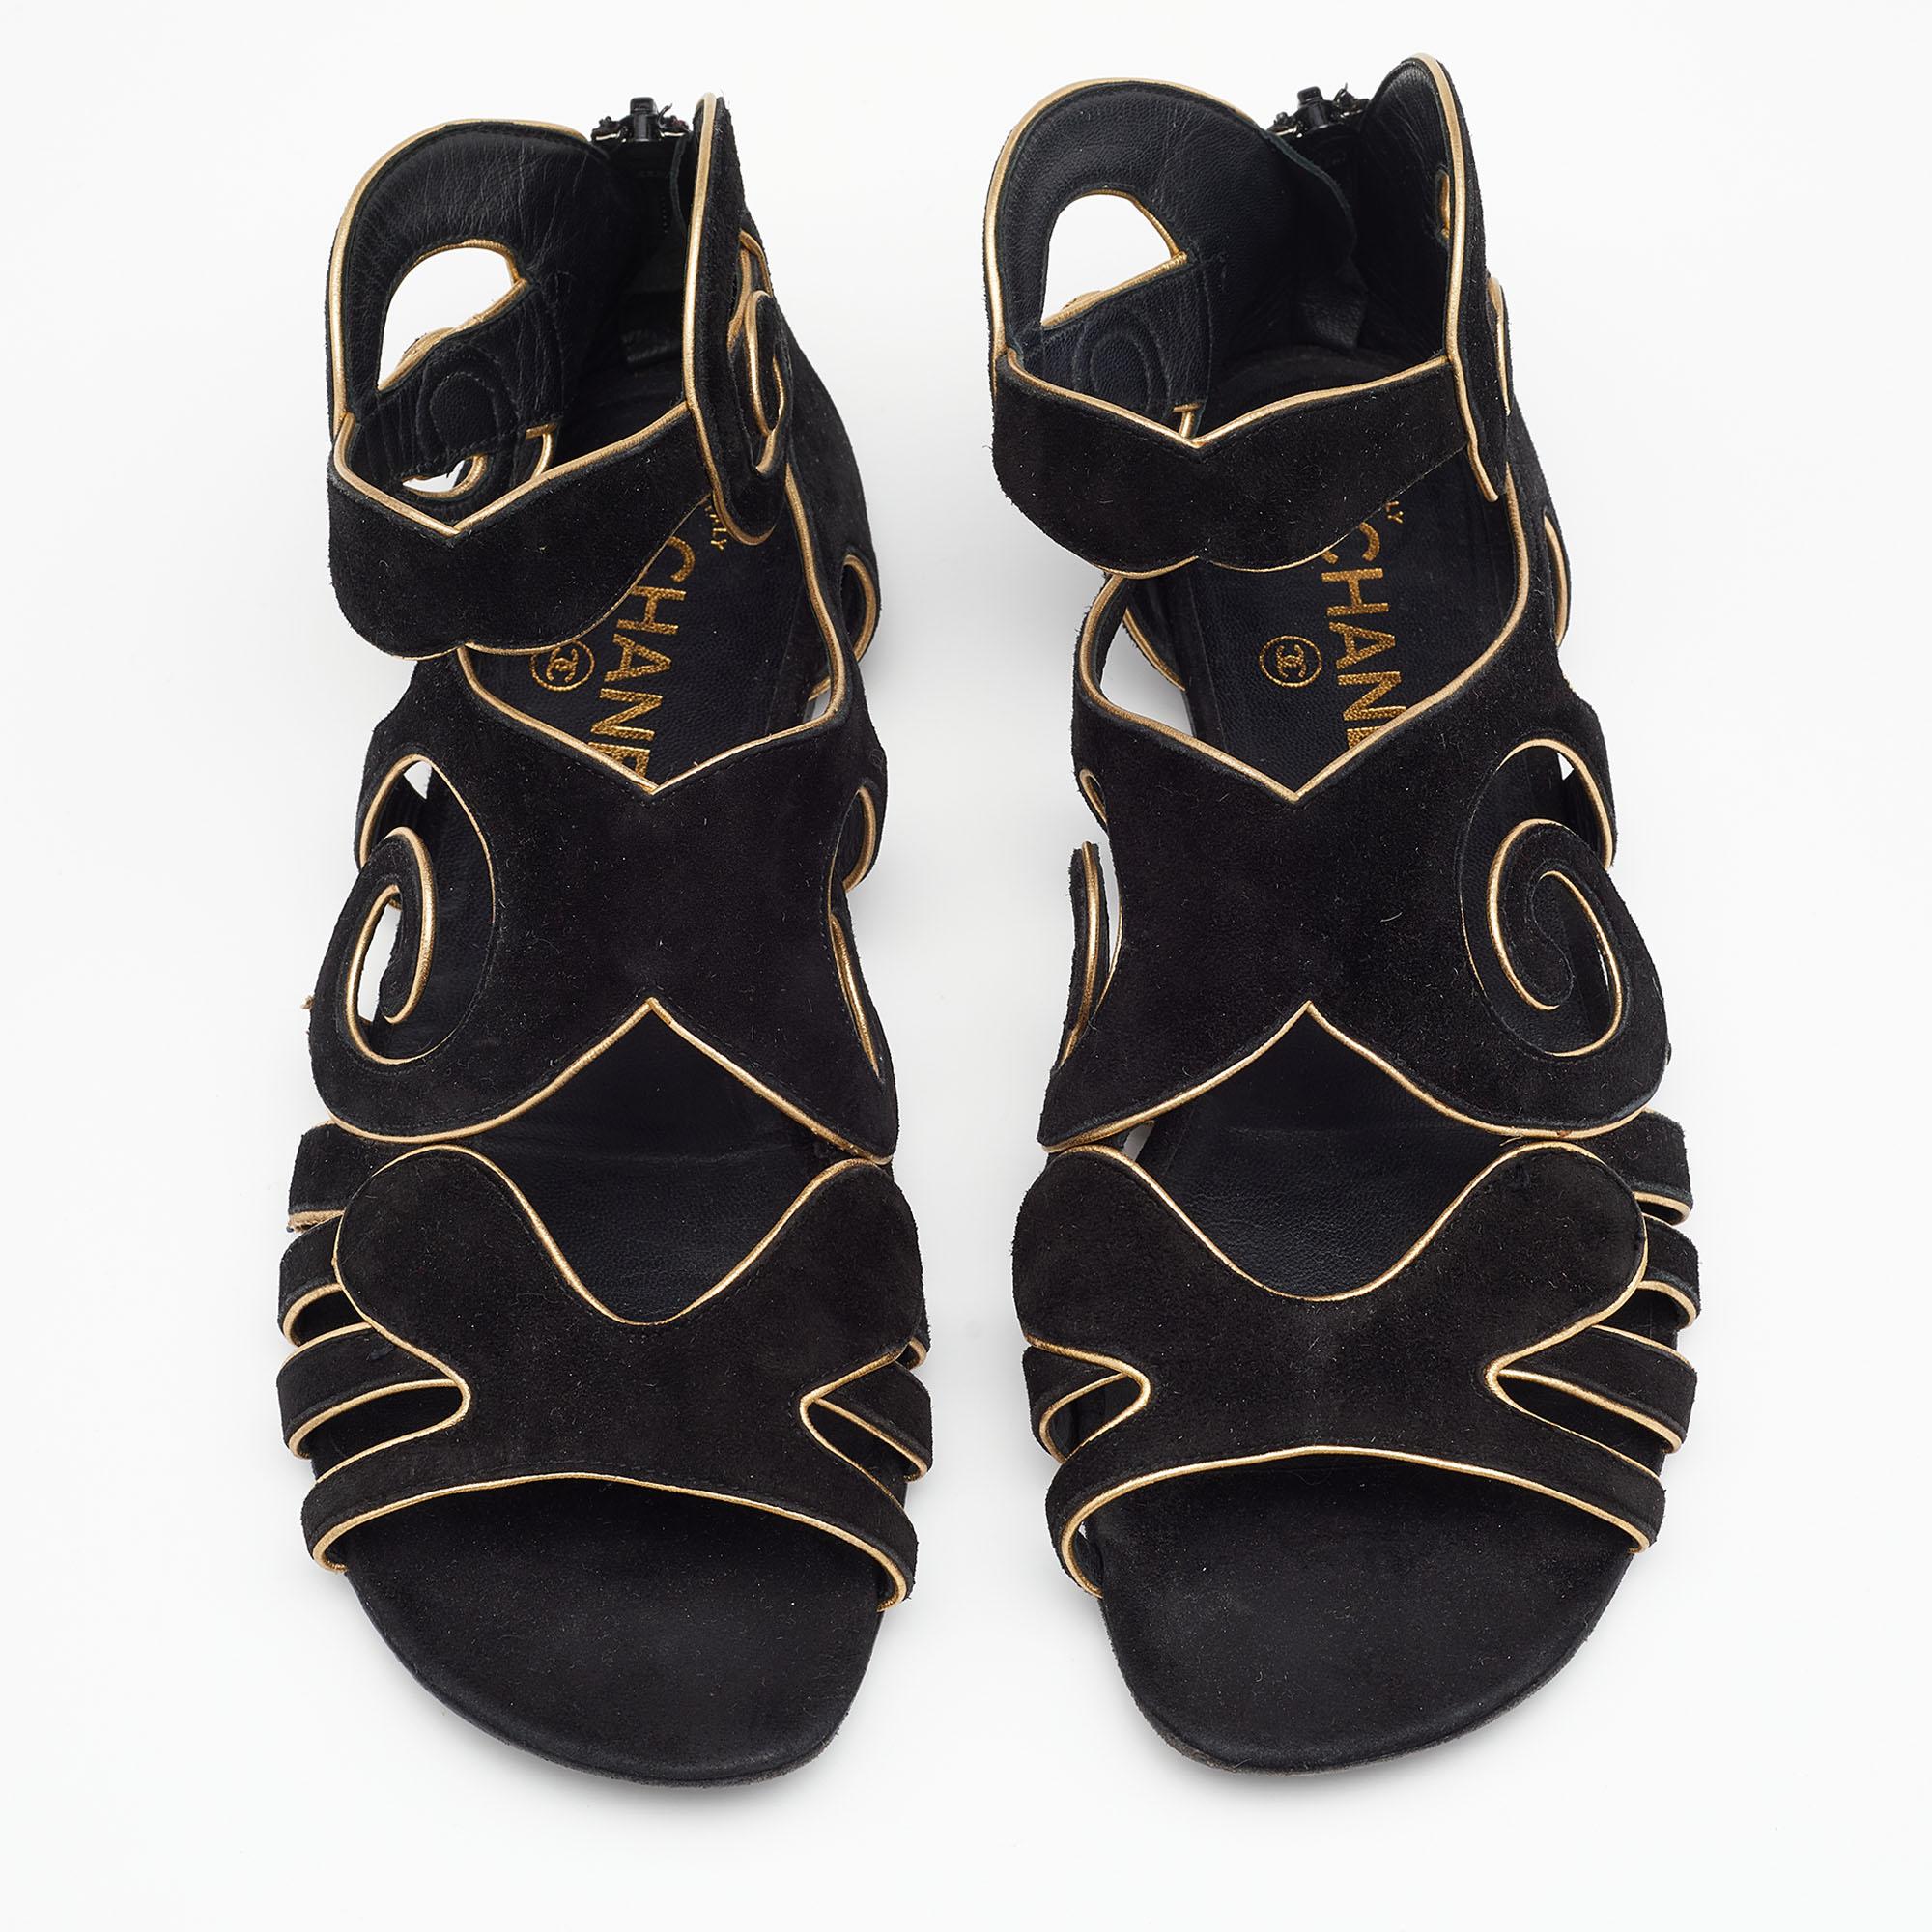 These gladiator flat sandals from the House of Chanel are all about class and elegance! They are made from black-gold suede on the exterior. They display black-tone hardware and a zipper closure. Flaunt your chic style with these Chanel sandals.

